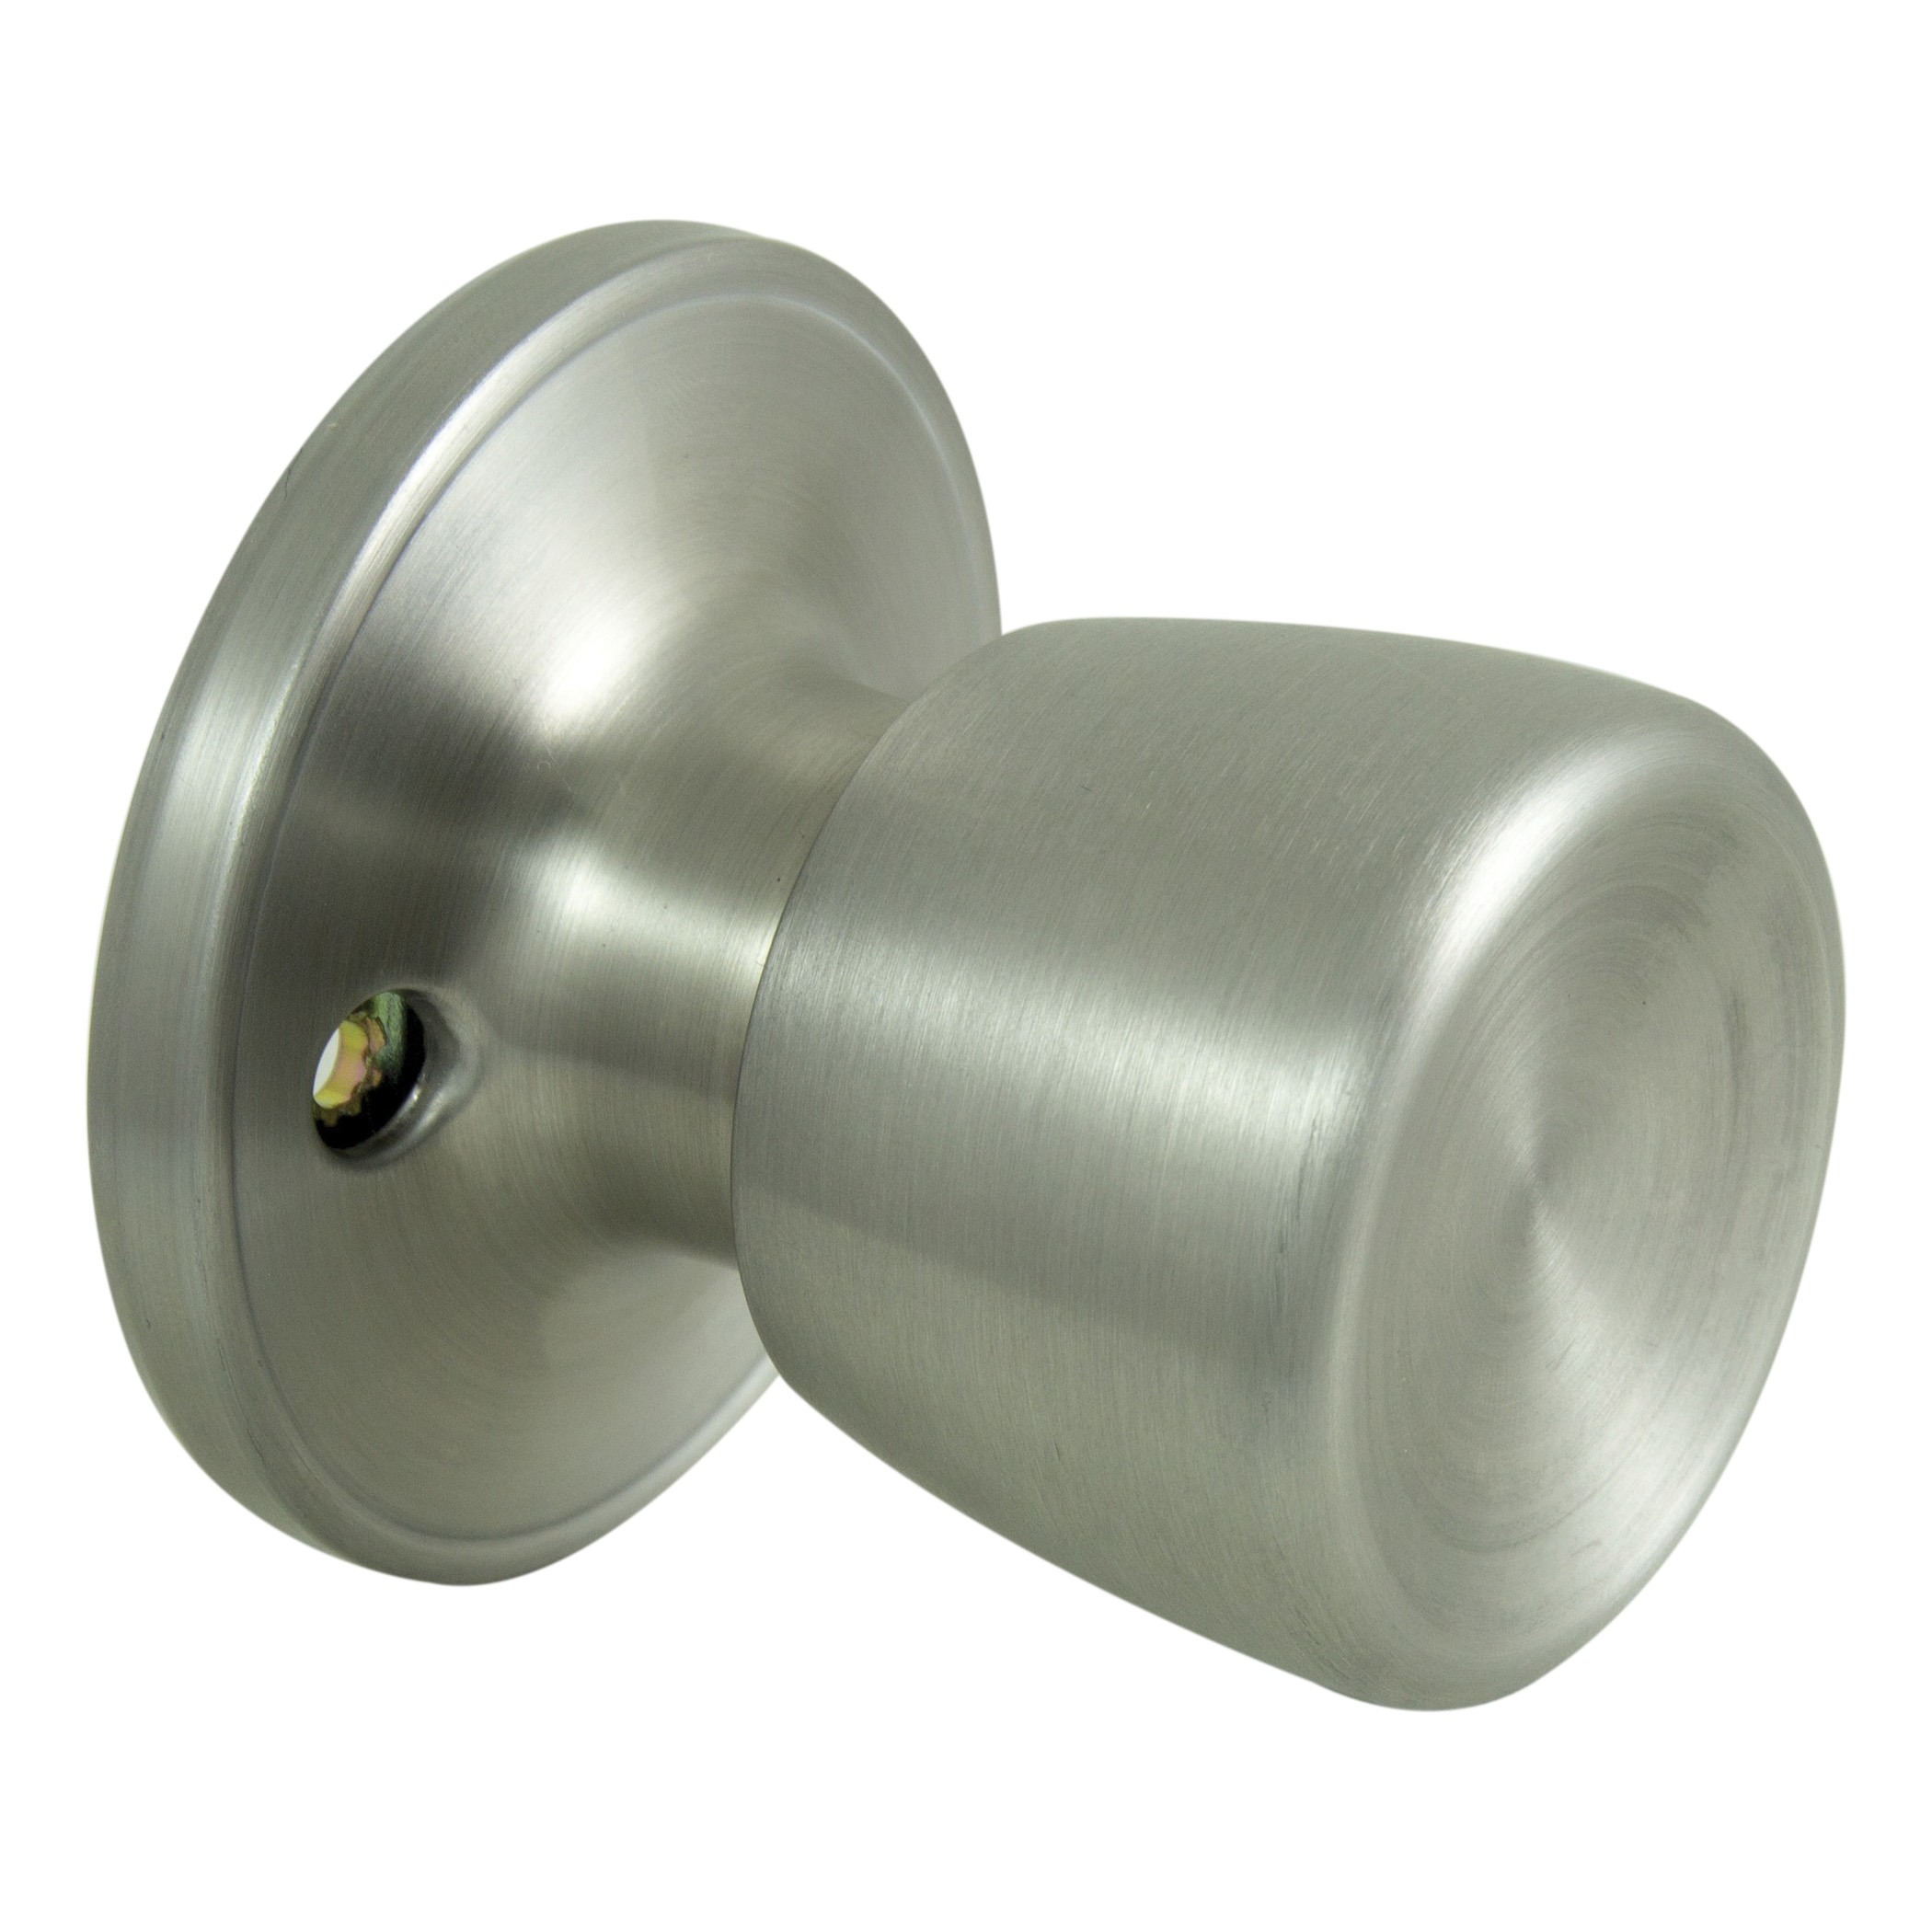 Dummy Knob, Tulip Design, 1-3/8 to 1-3/4 in Thick Door, Stainless Steel, 65.7 mm Rose/Base